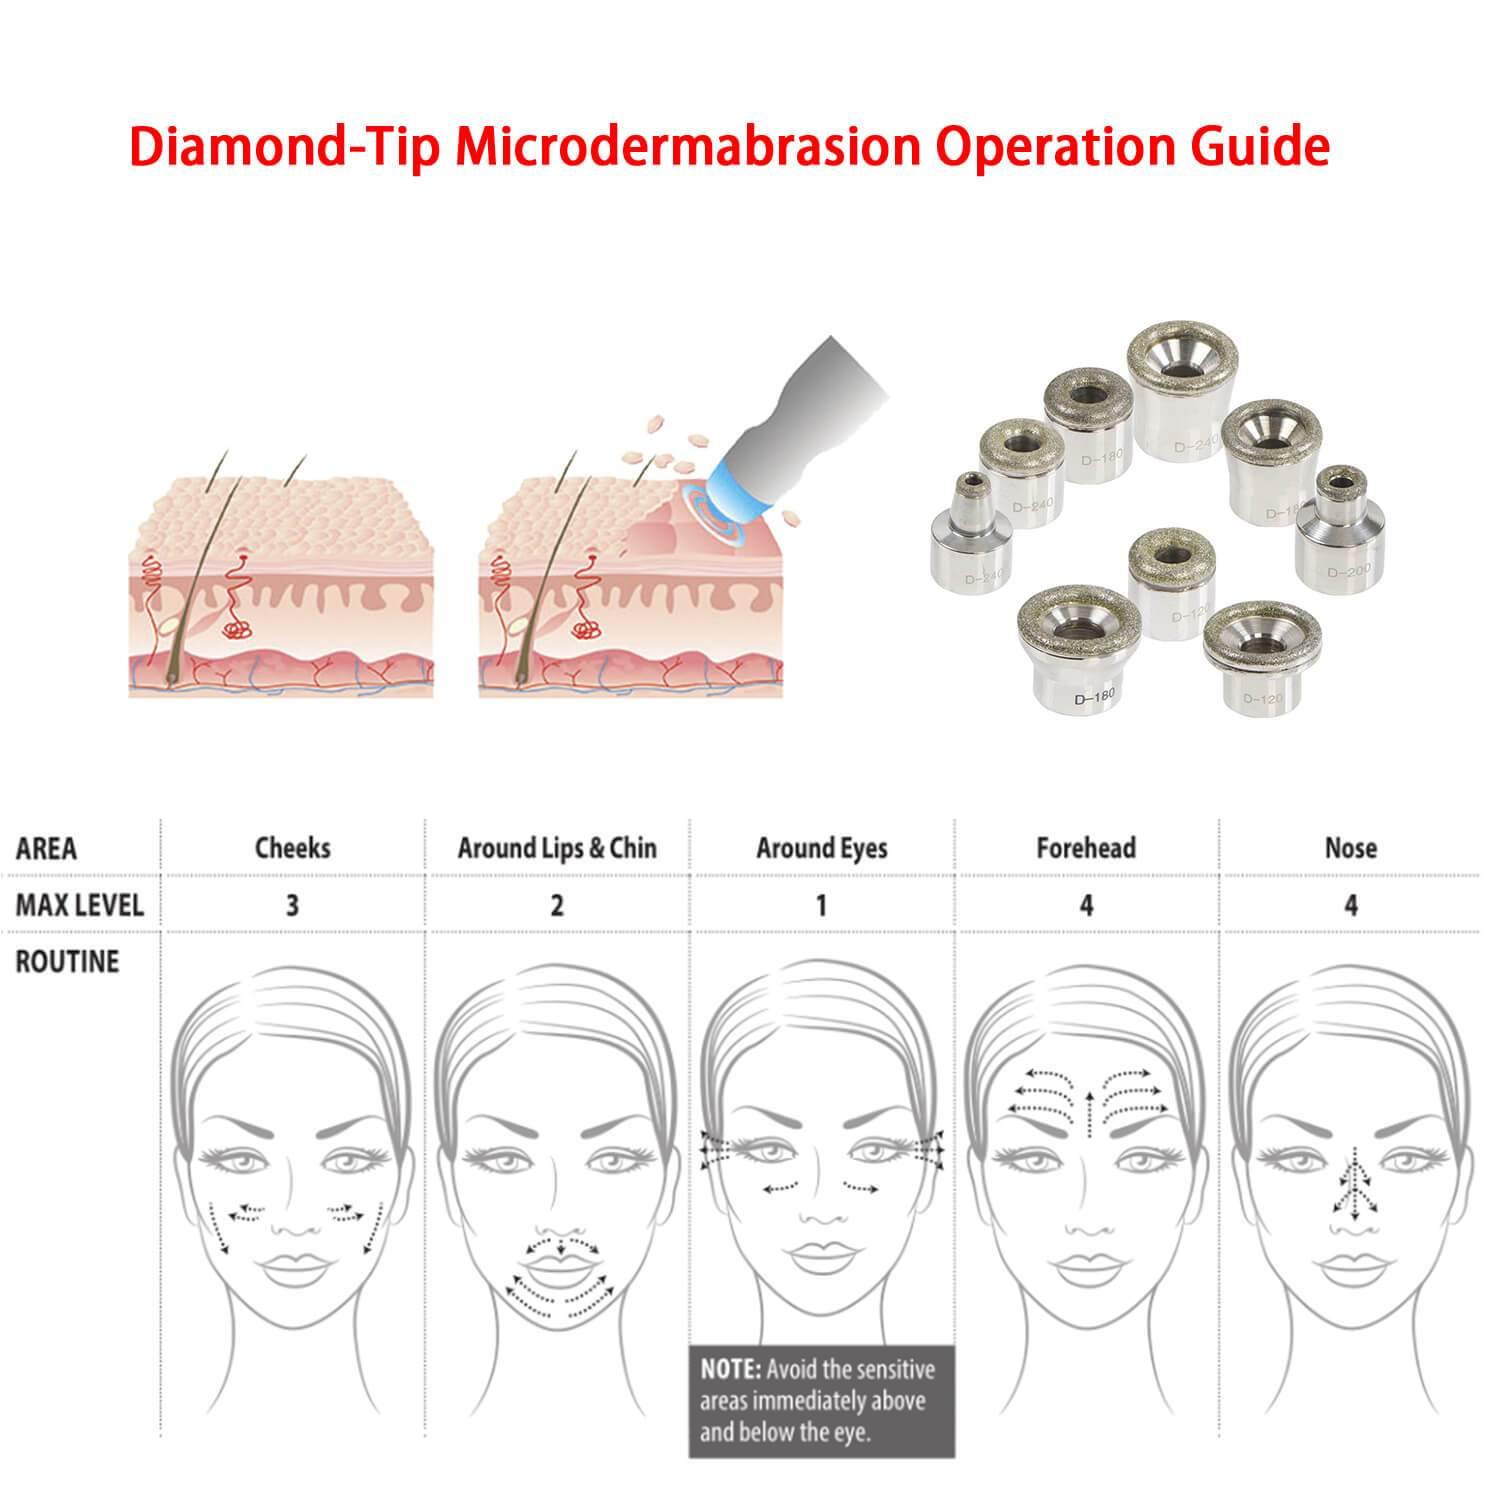 9Pcs Dermabrasion Tips Replacement for Skin Peeling - Lazzybeauty